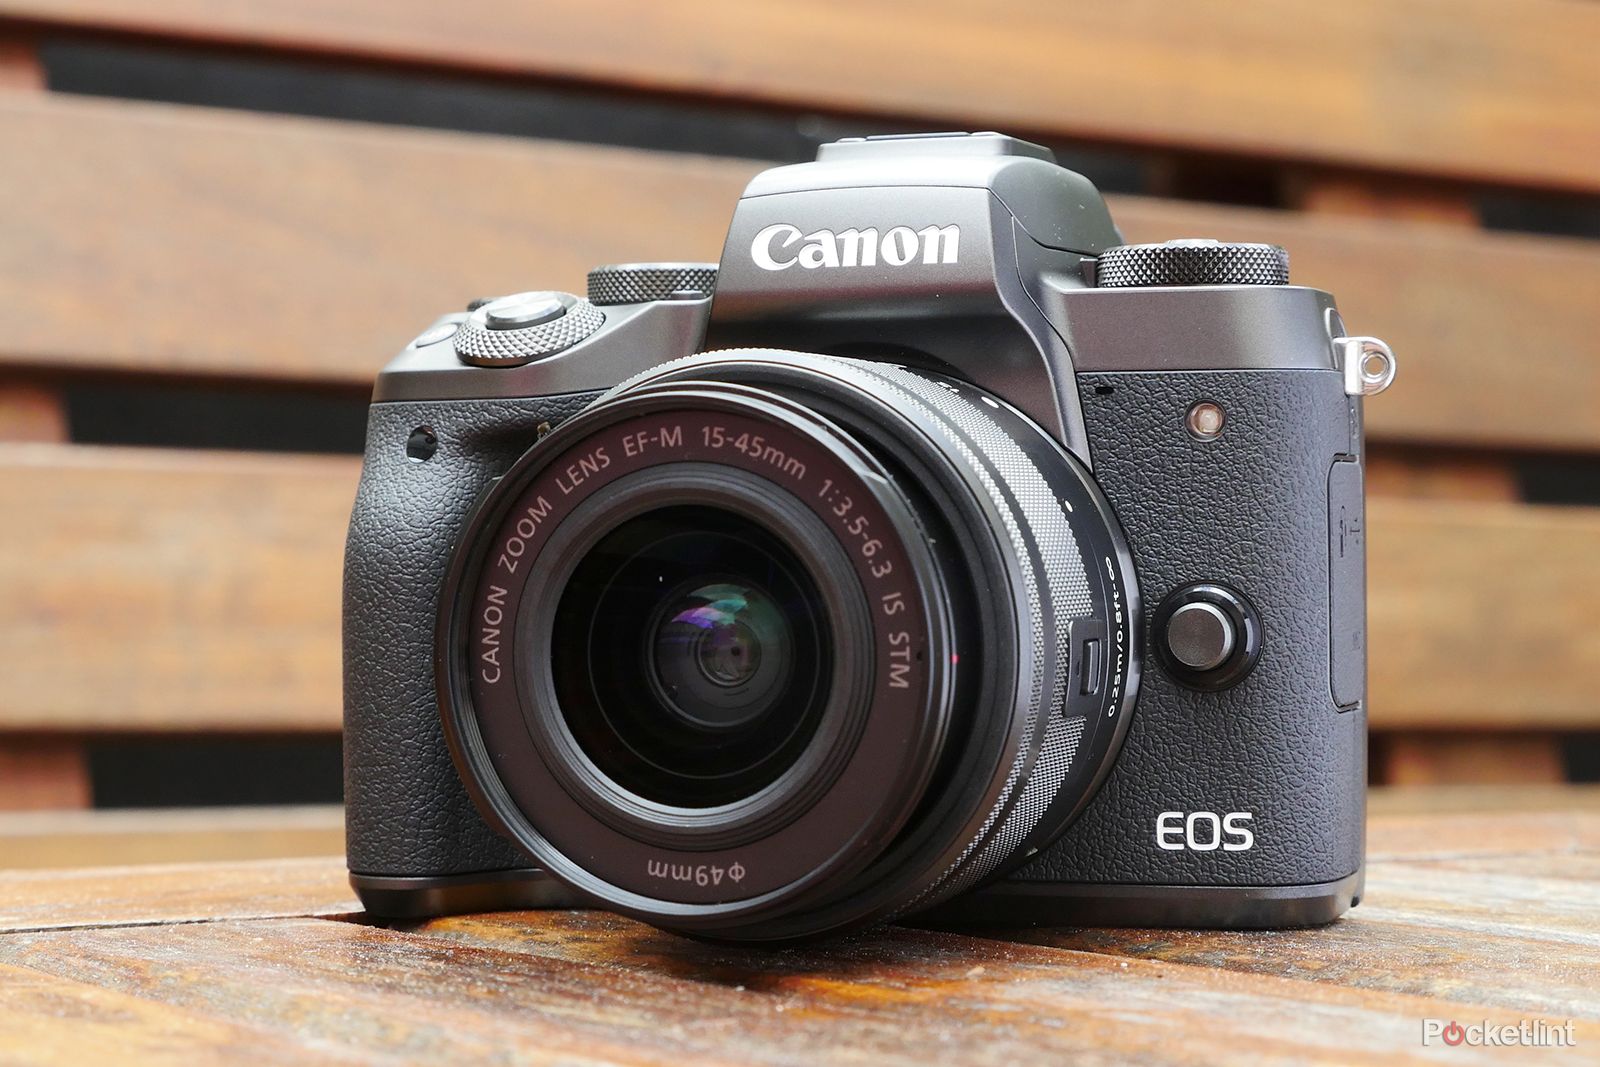 Canon EOS M5 Review: A Small and Super-fast Mirrorless Camera